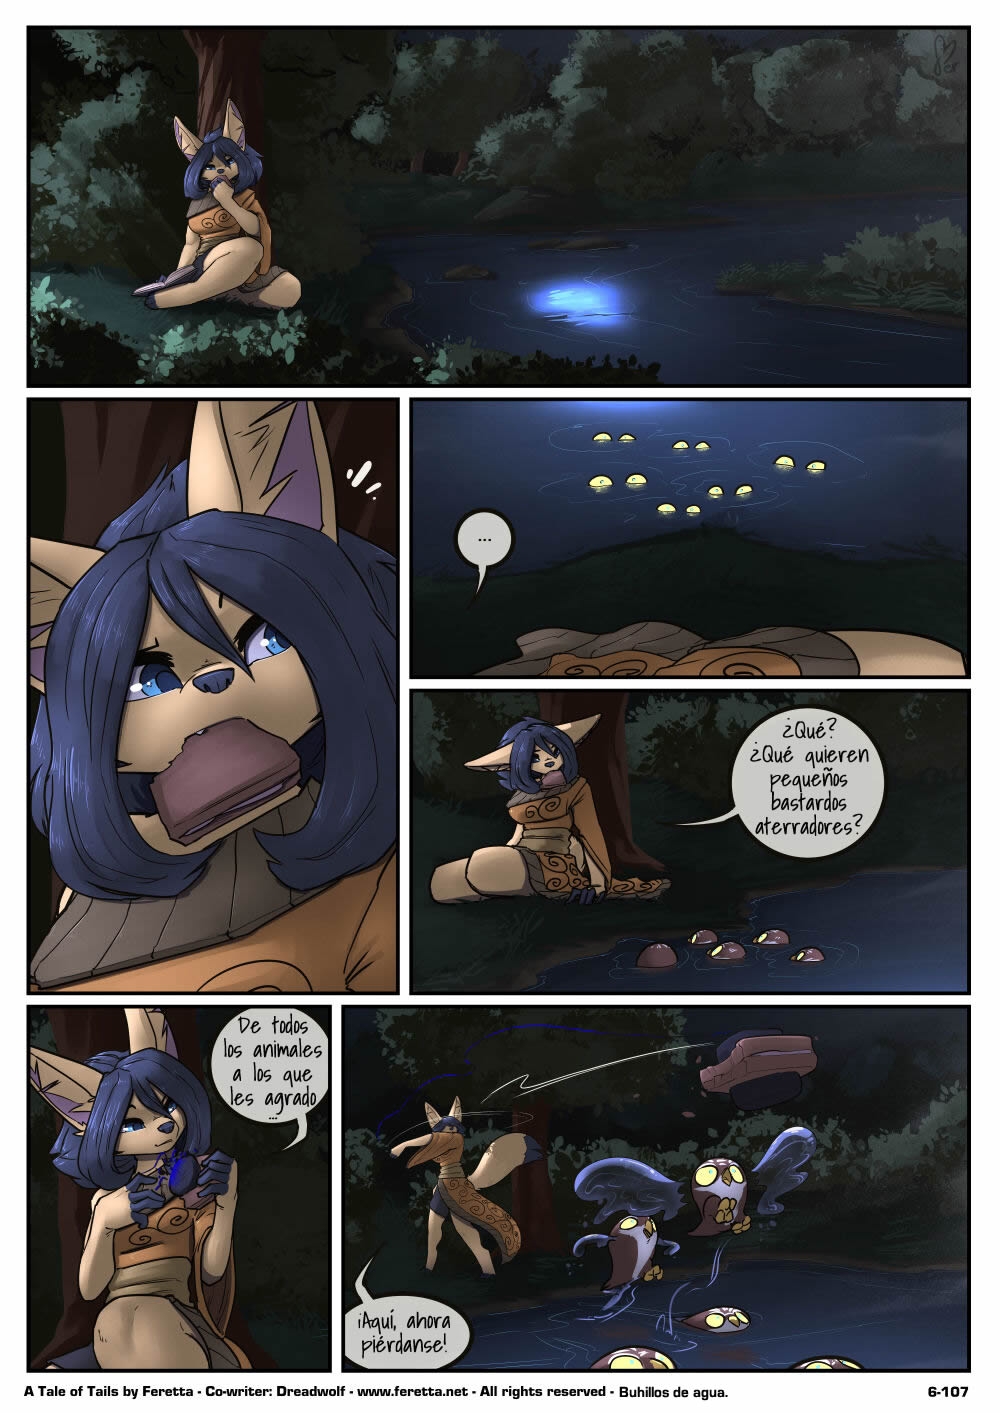 [Feretta] A Tale of Tails: Chapter 6 - Paths converge / Los caminos convergen [Spanish] [Red Fox Makkan] 107